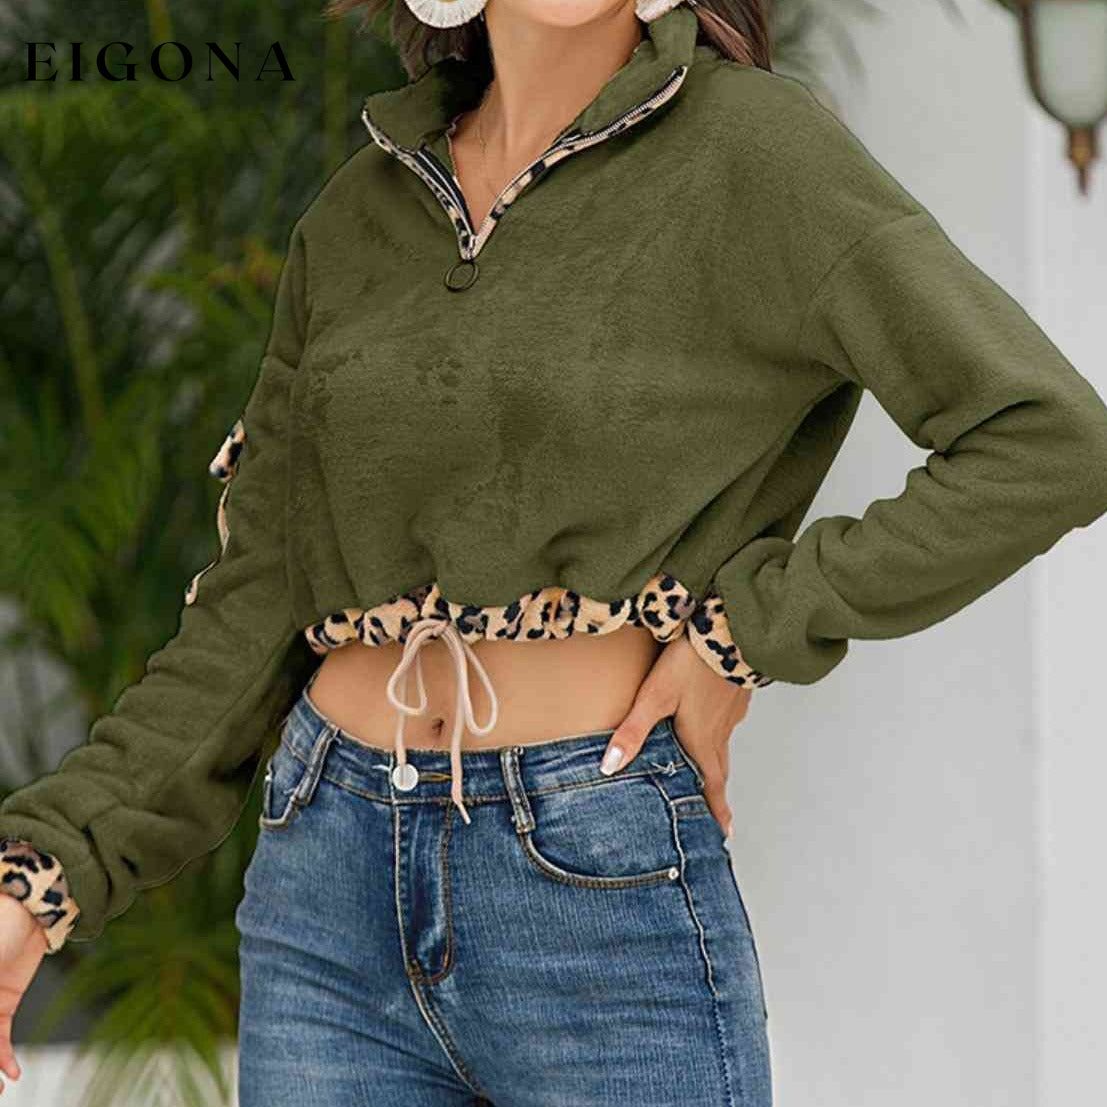 Leopard Half Zip Drawstring Cropped Sweatshirt clothes L@X@G Ship From Overseas